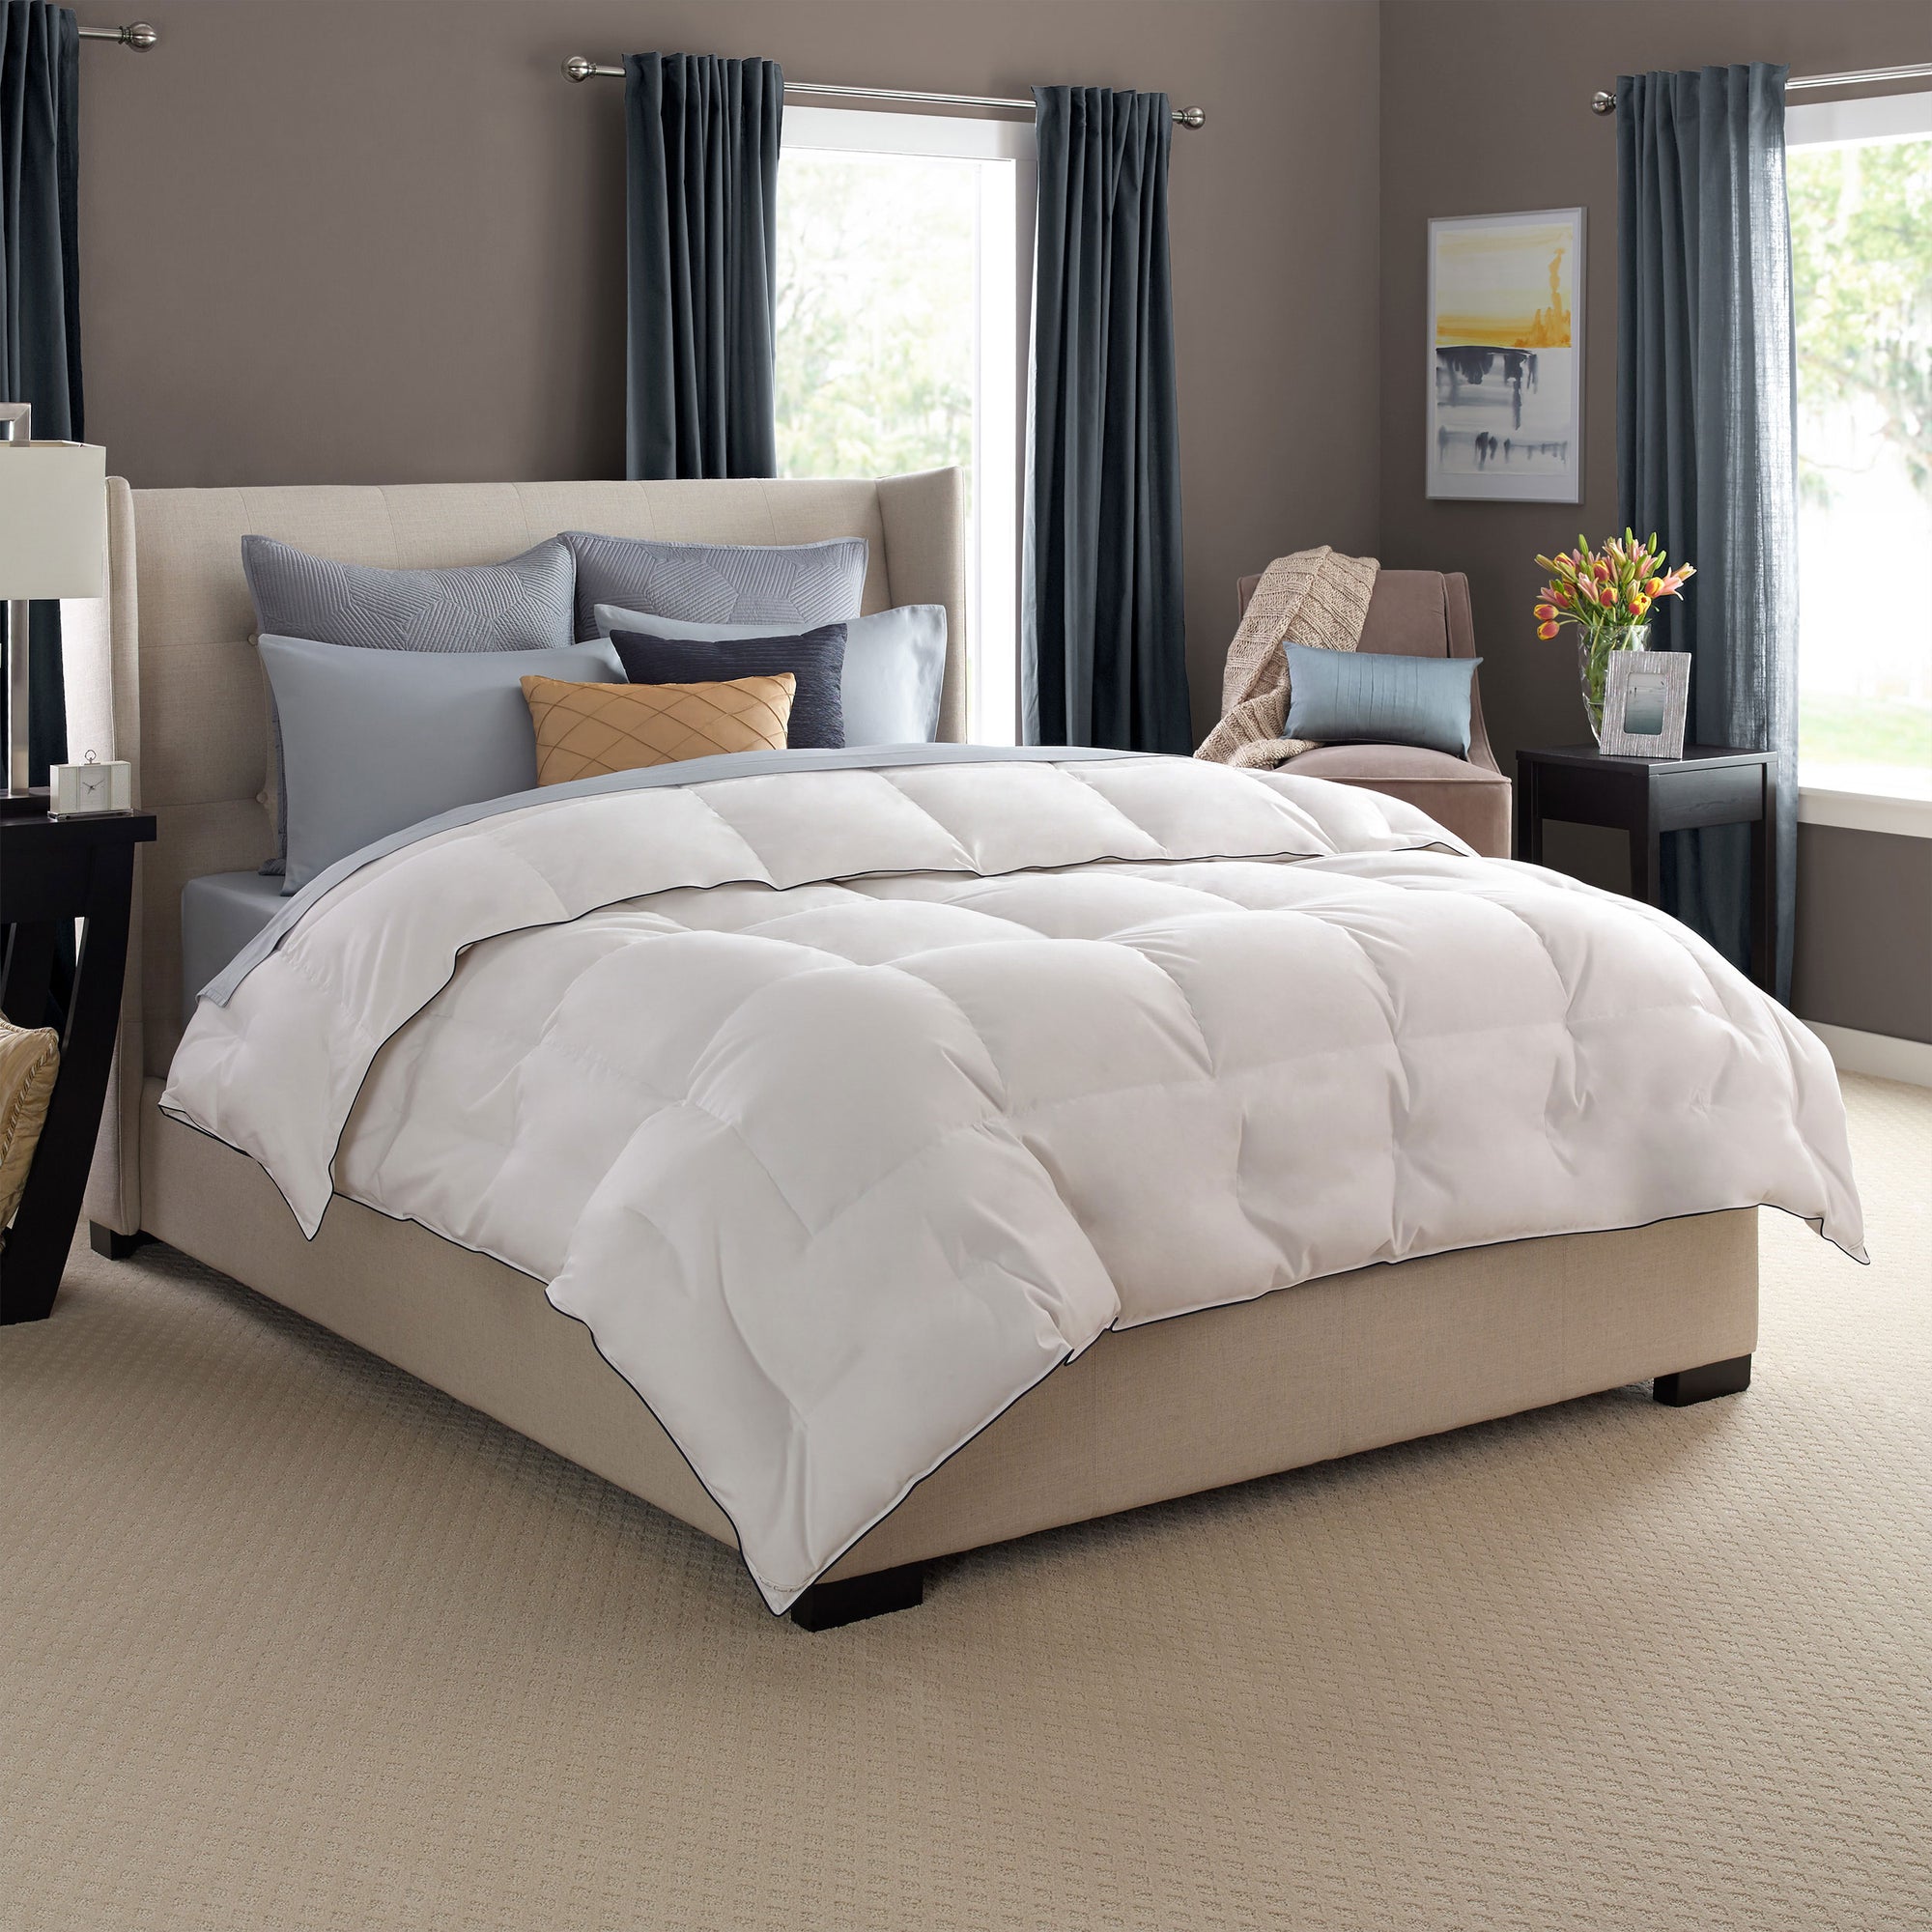 Pacific Coast Luxury Down Comforter Review